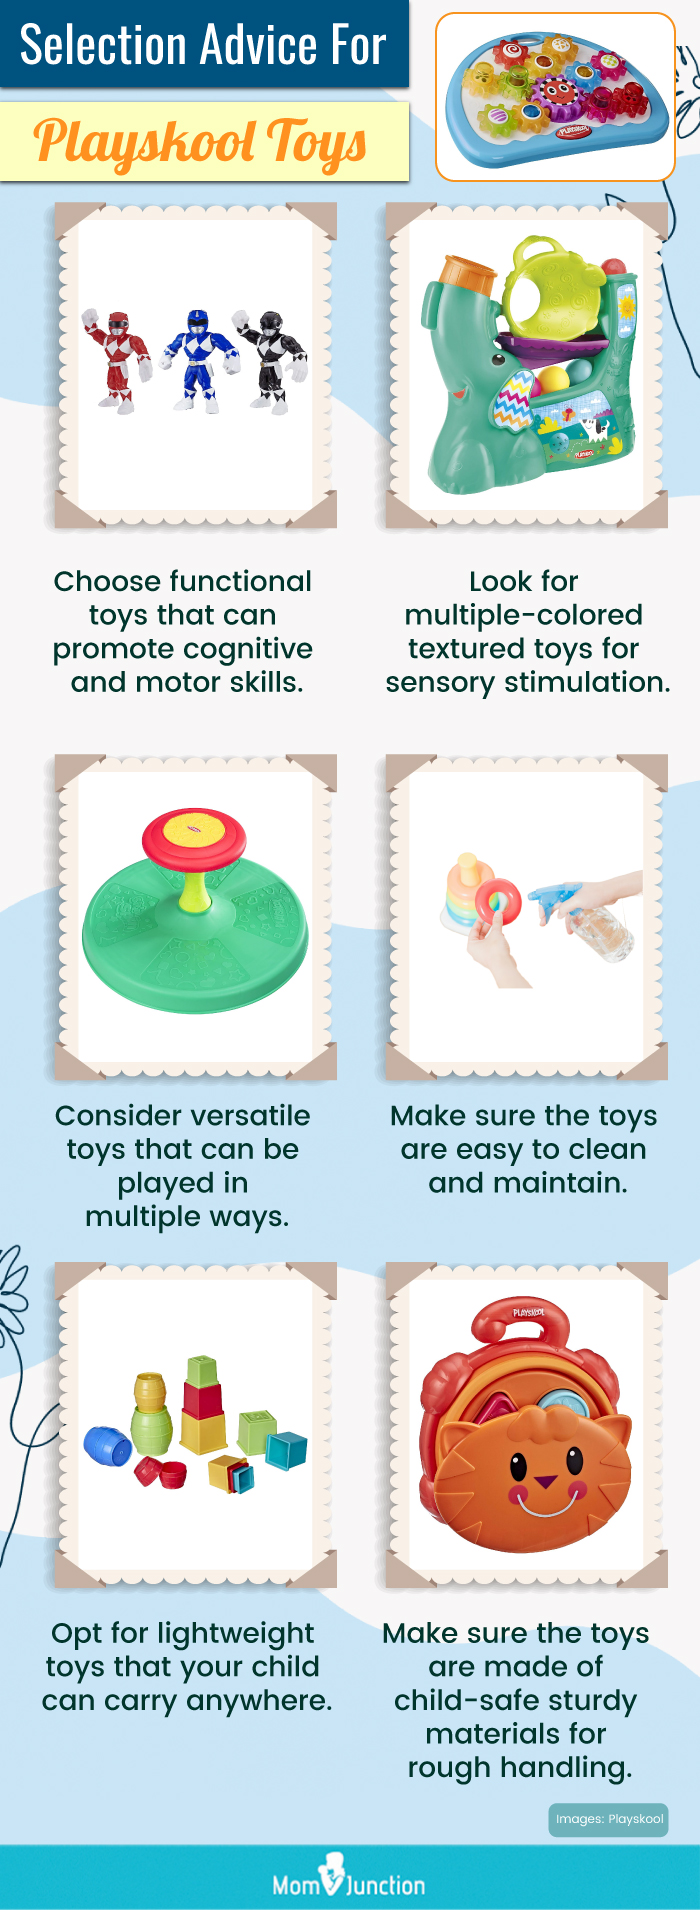 Selection Advice For Playskool Toys (infographic)